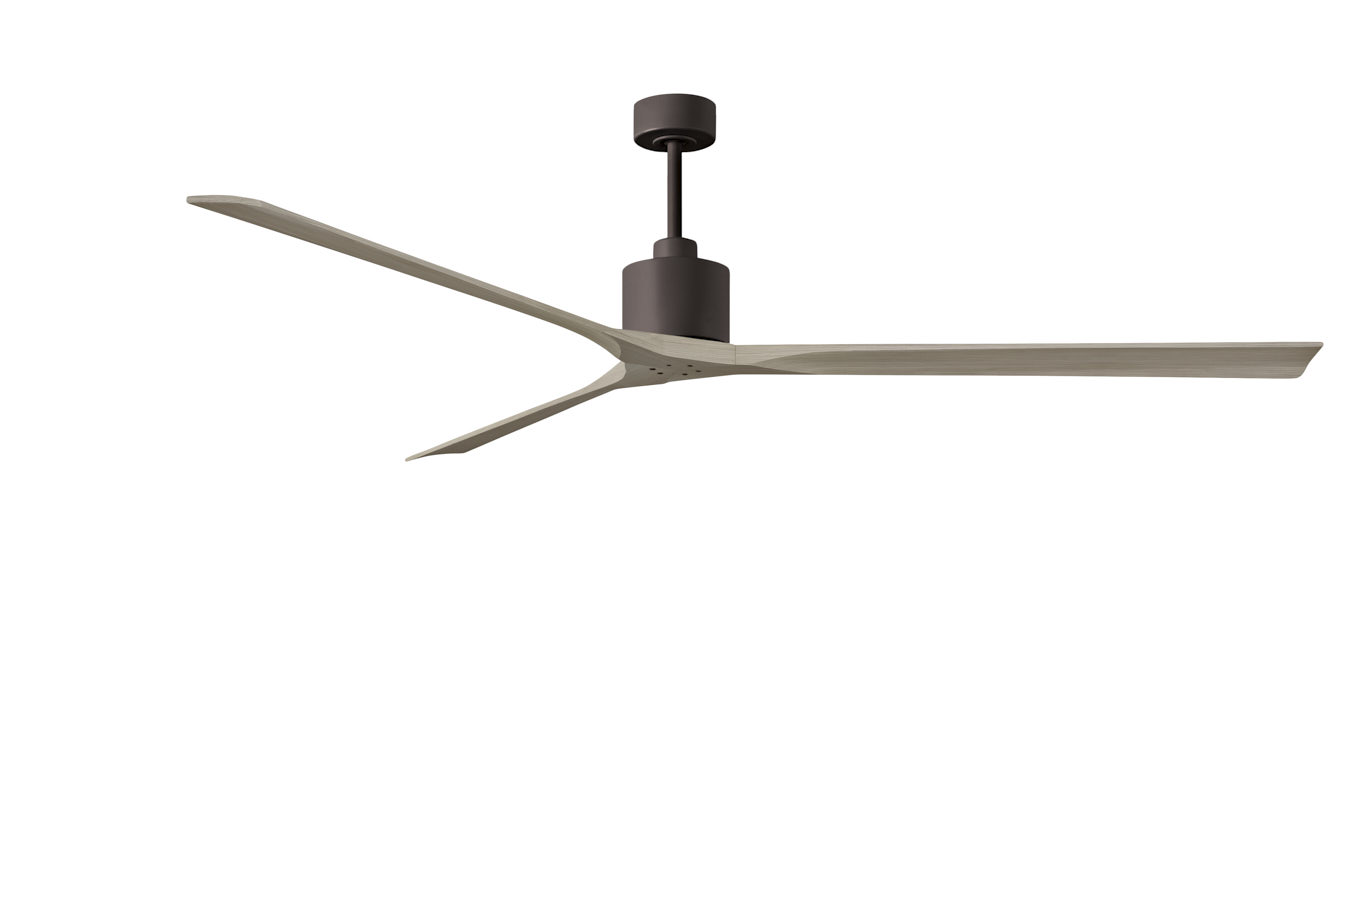 Nan XL ceiling fan in Textured Bronze with 90” Gray Ash blades